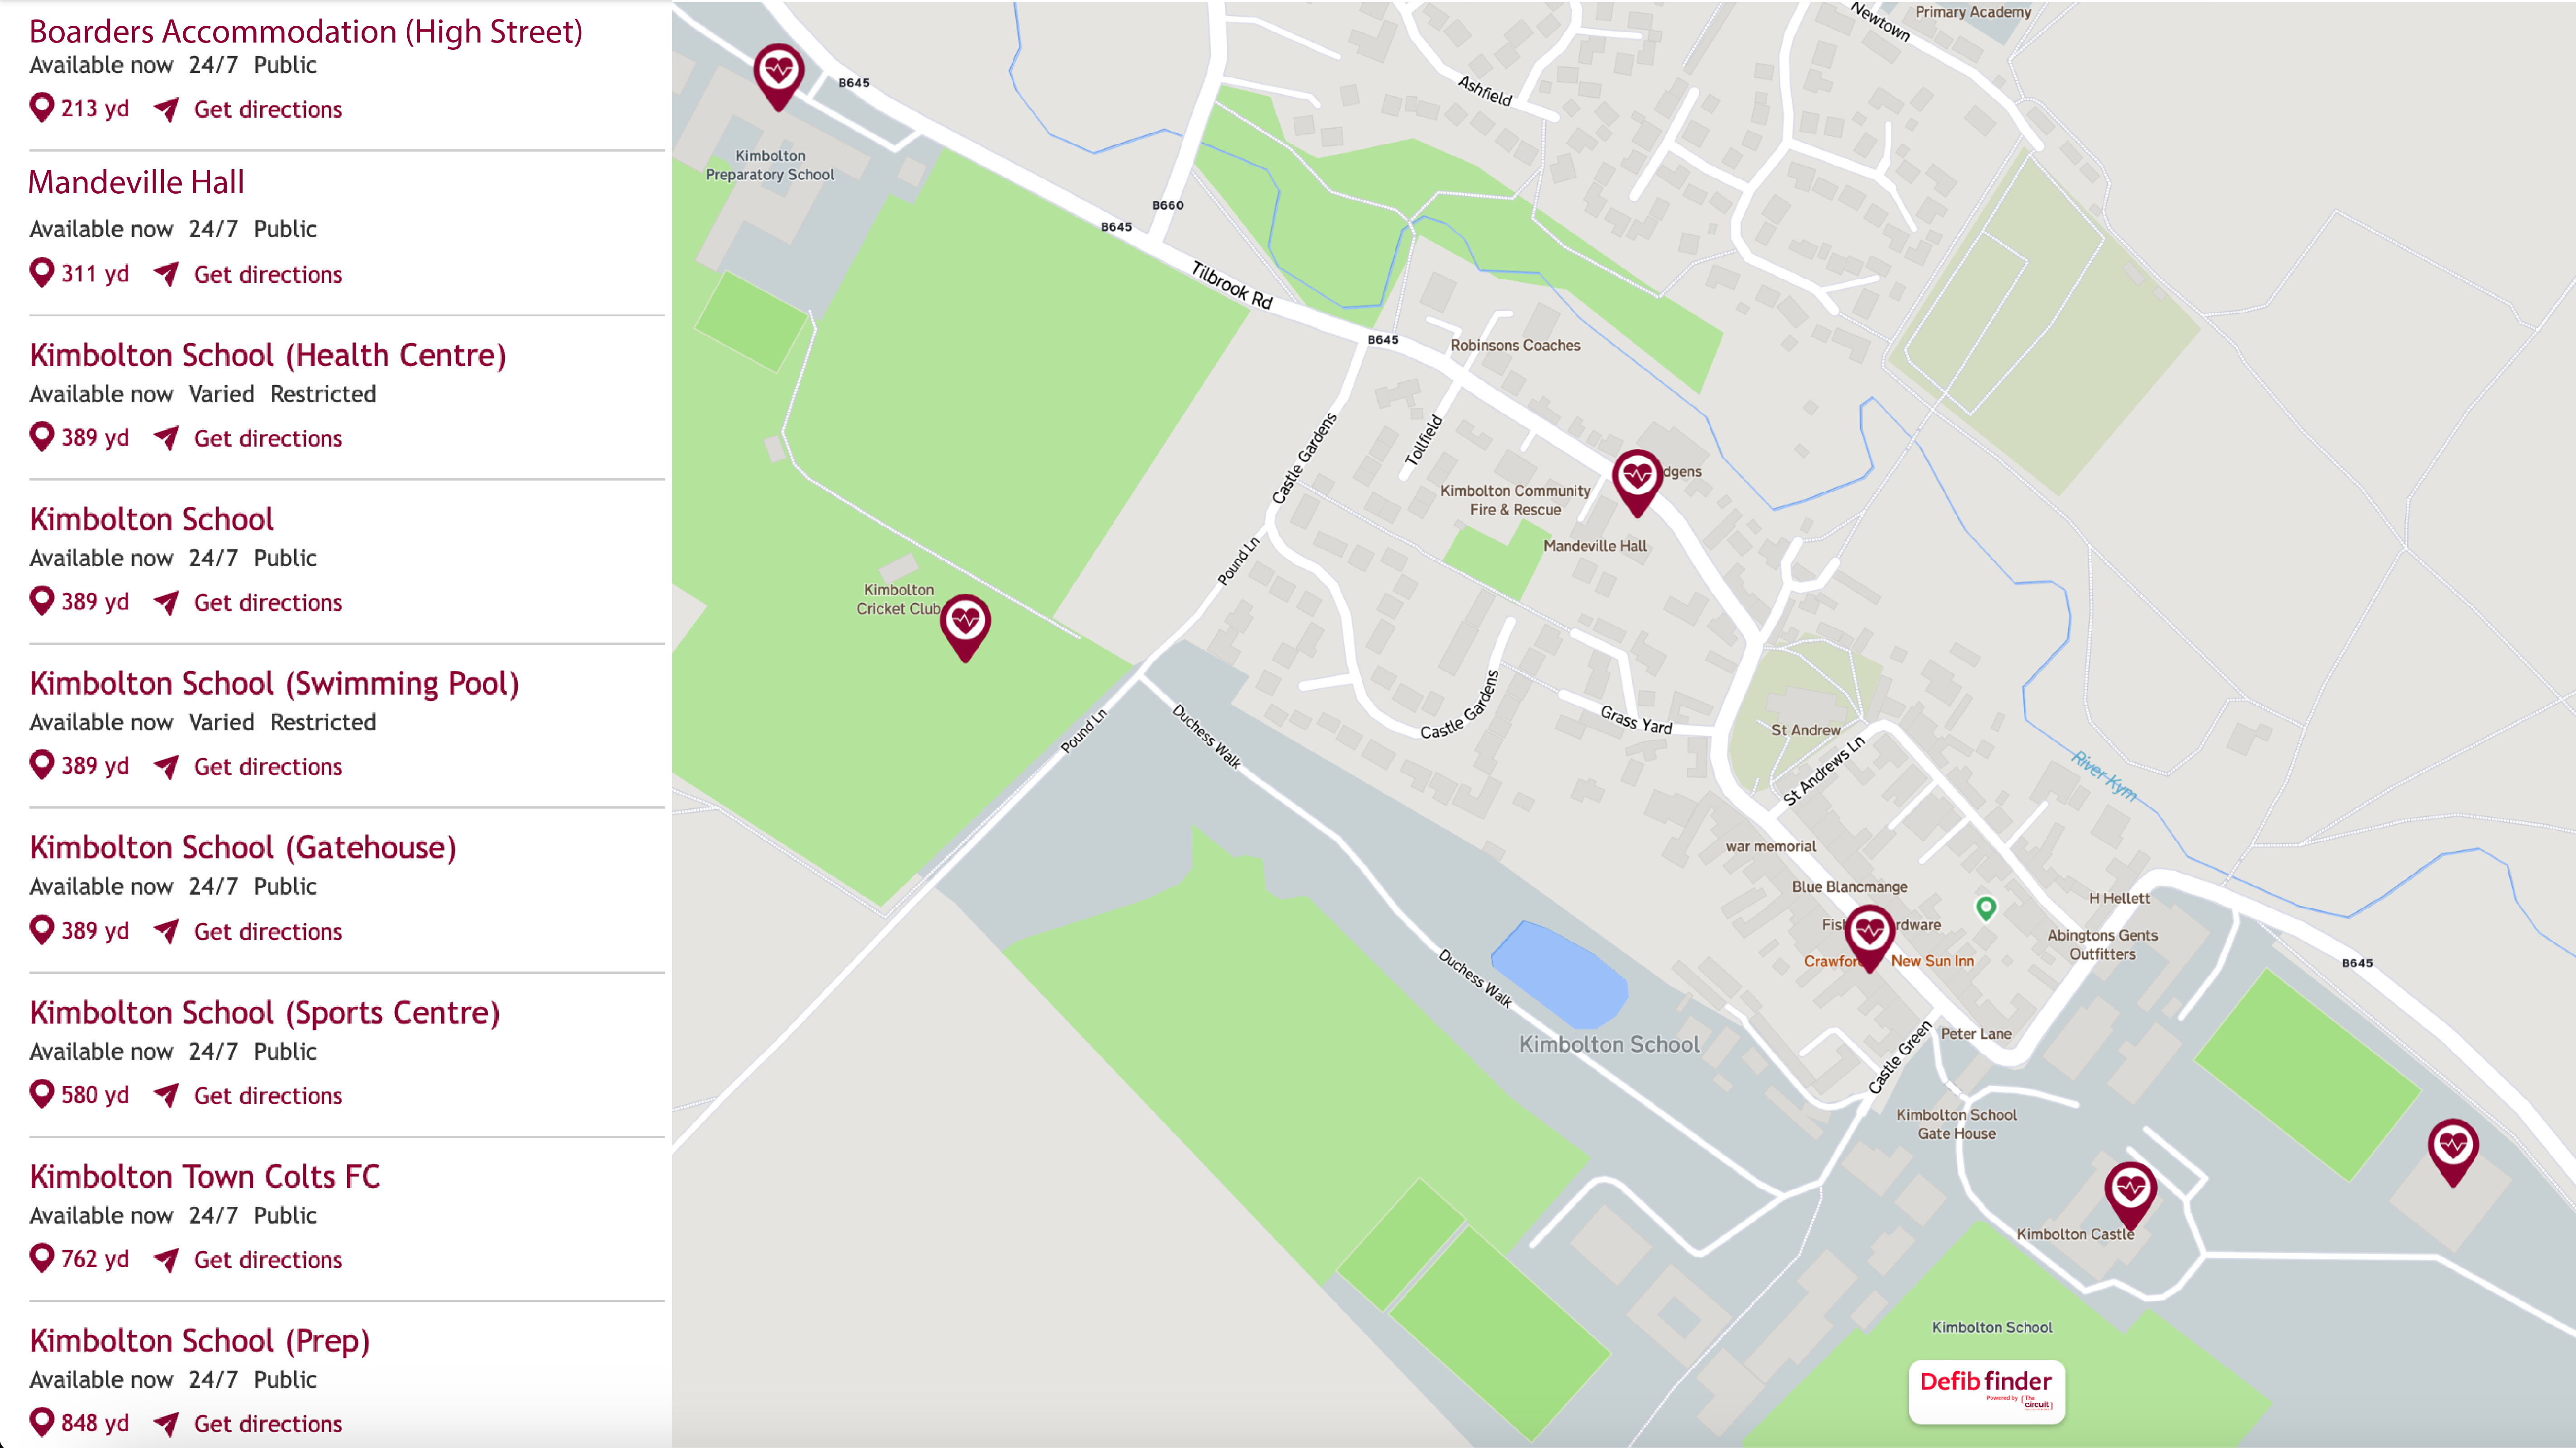 A map of the defibrillator locations around Kimbolton.